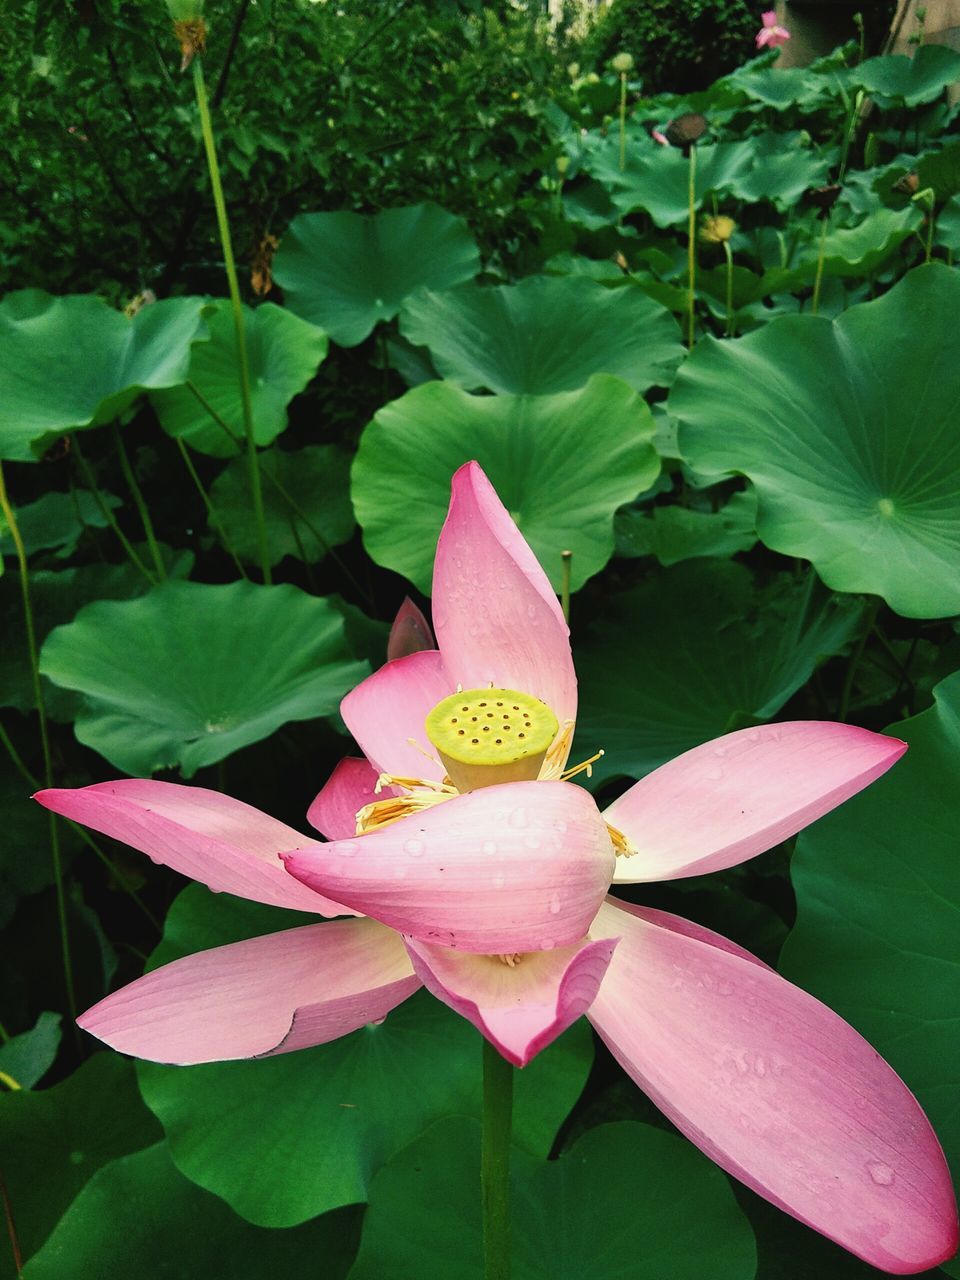 petal, flower, leaf, growth, beauty in nature, freshness, nature, fragility, pink color, flower head, plant, lotus water lily, green color, day, lotus, outdoors, blooming, no people, close-up